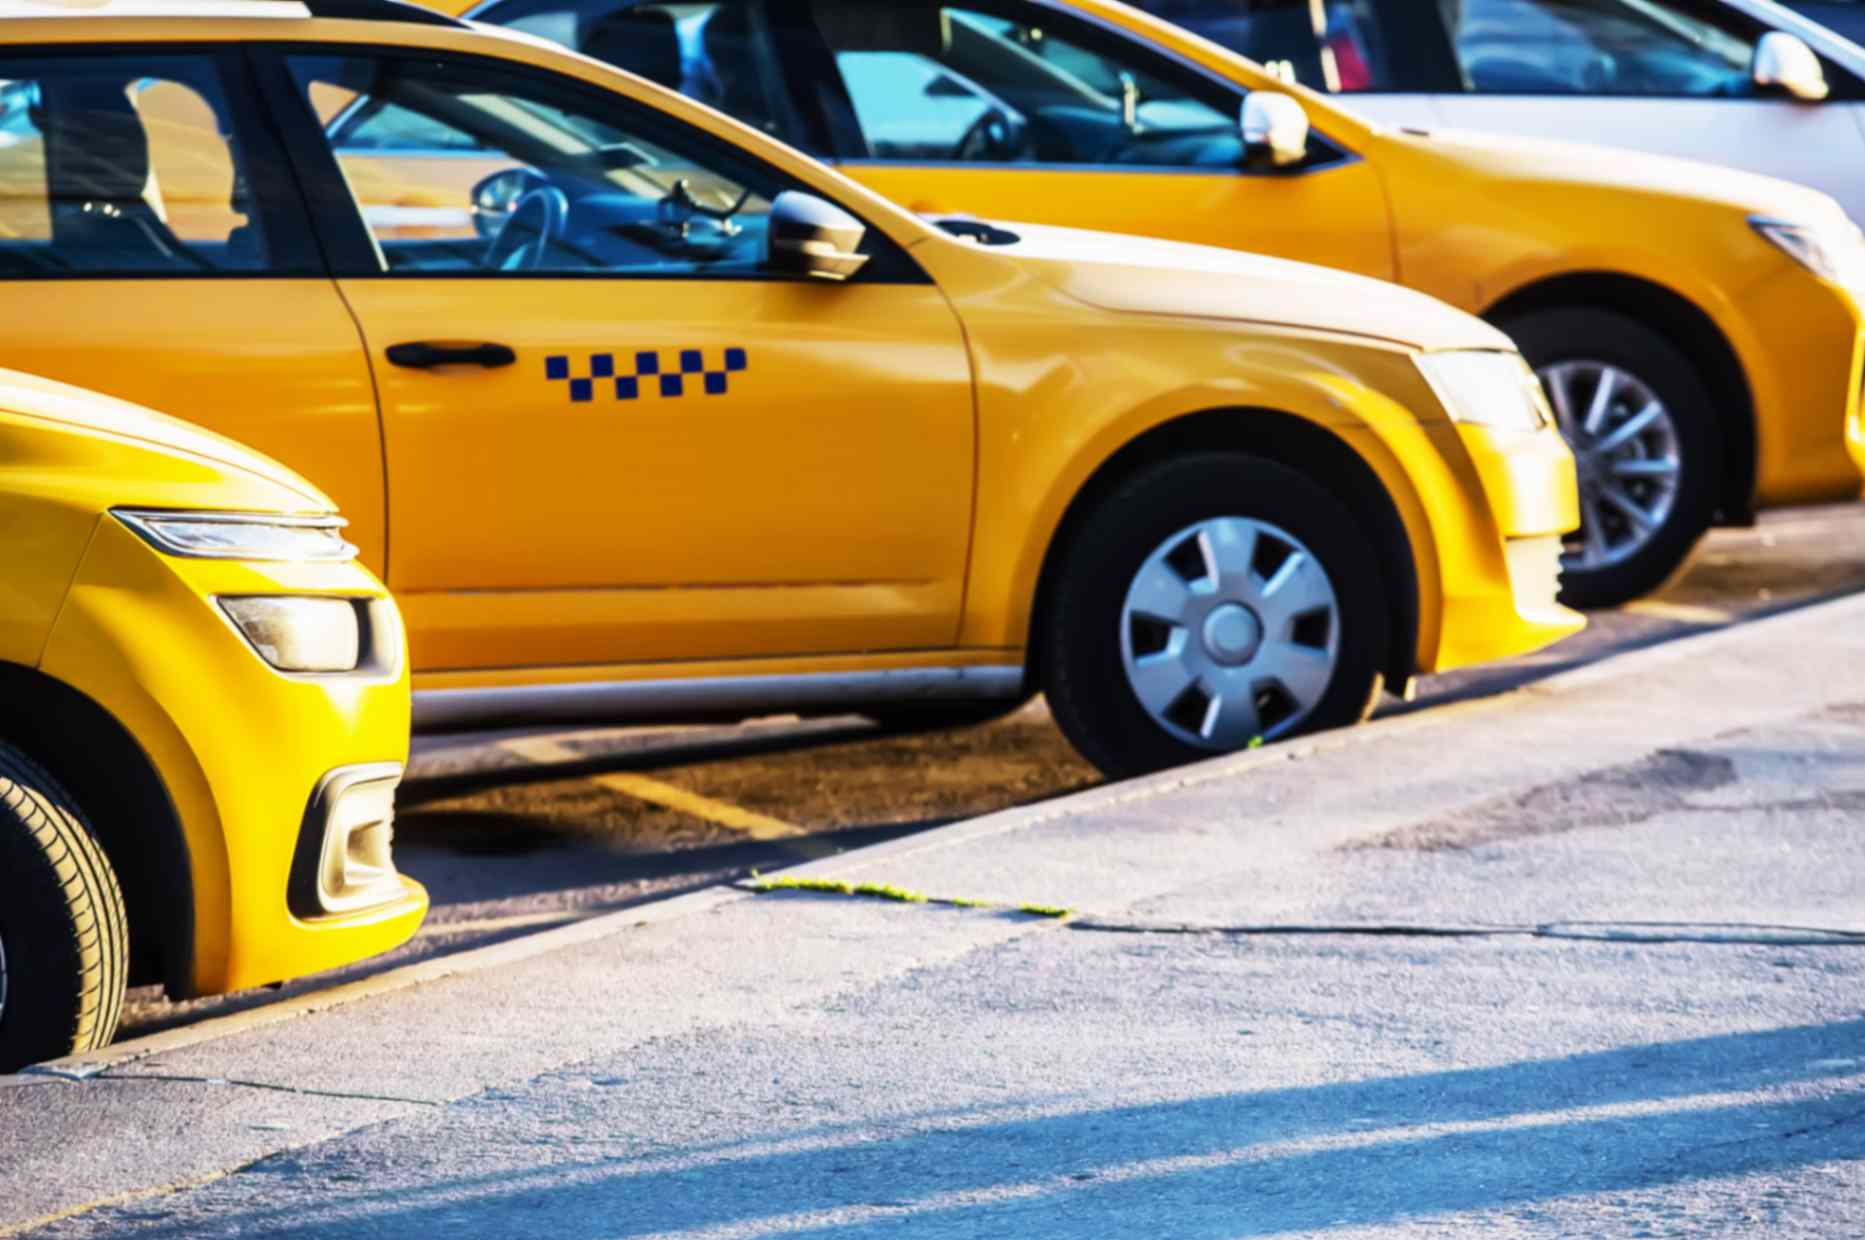 Insufficient number of Taxi Stands